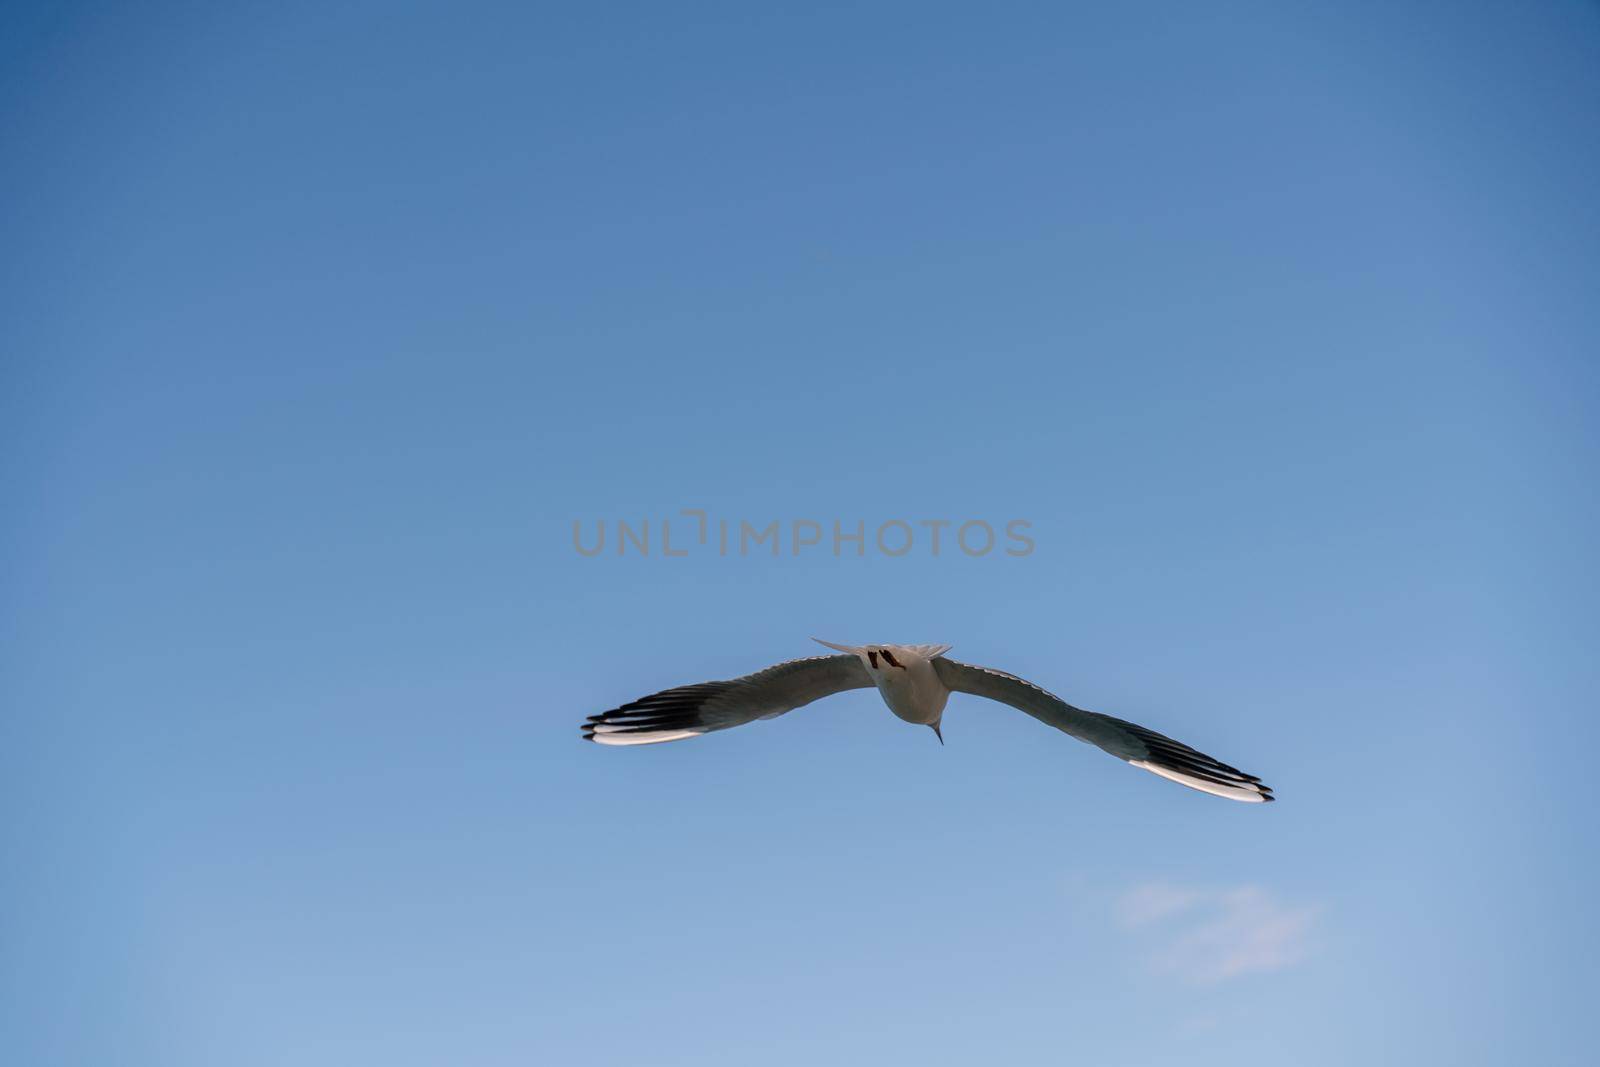 White seagull flies in the blue sky, seagull flies flying bird.